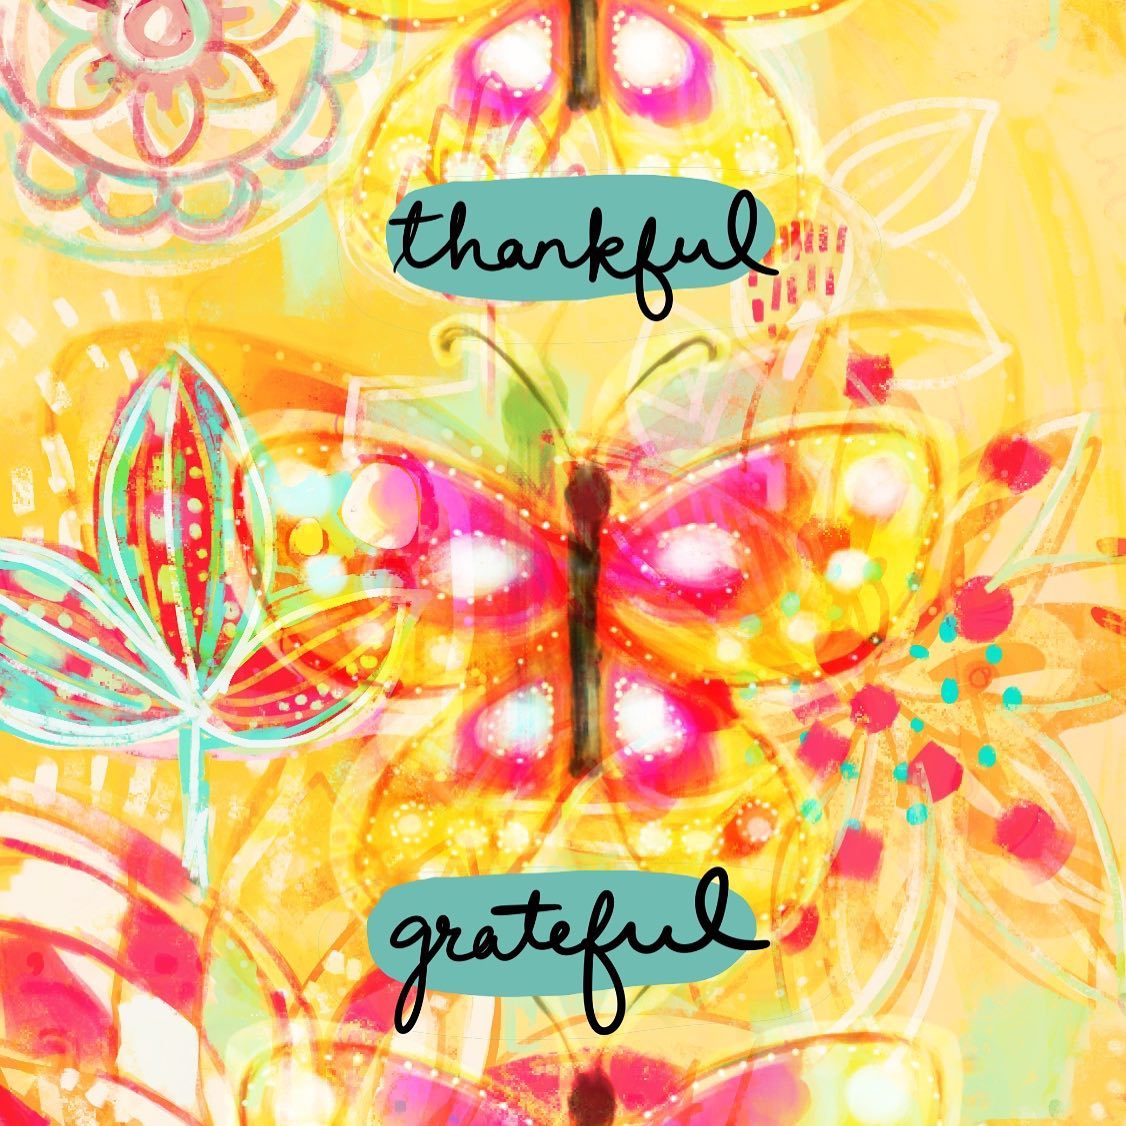 Today is a good day to be thankful!
Happy Thanksgiving!!

Download wallpaper for your phone: https://www.cheenakaul.com/downloads